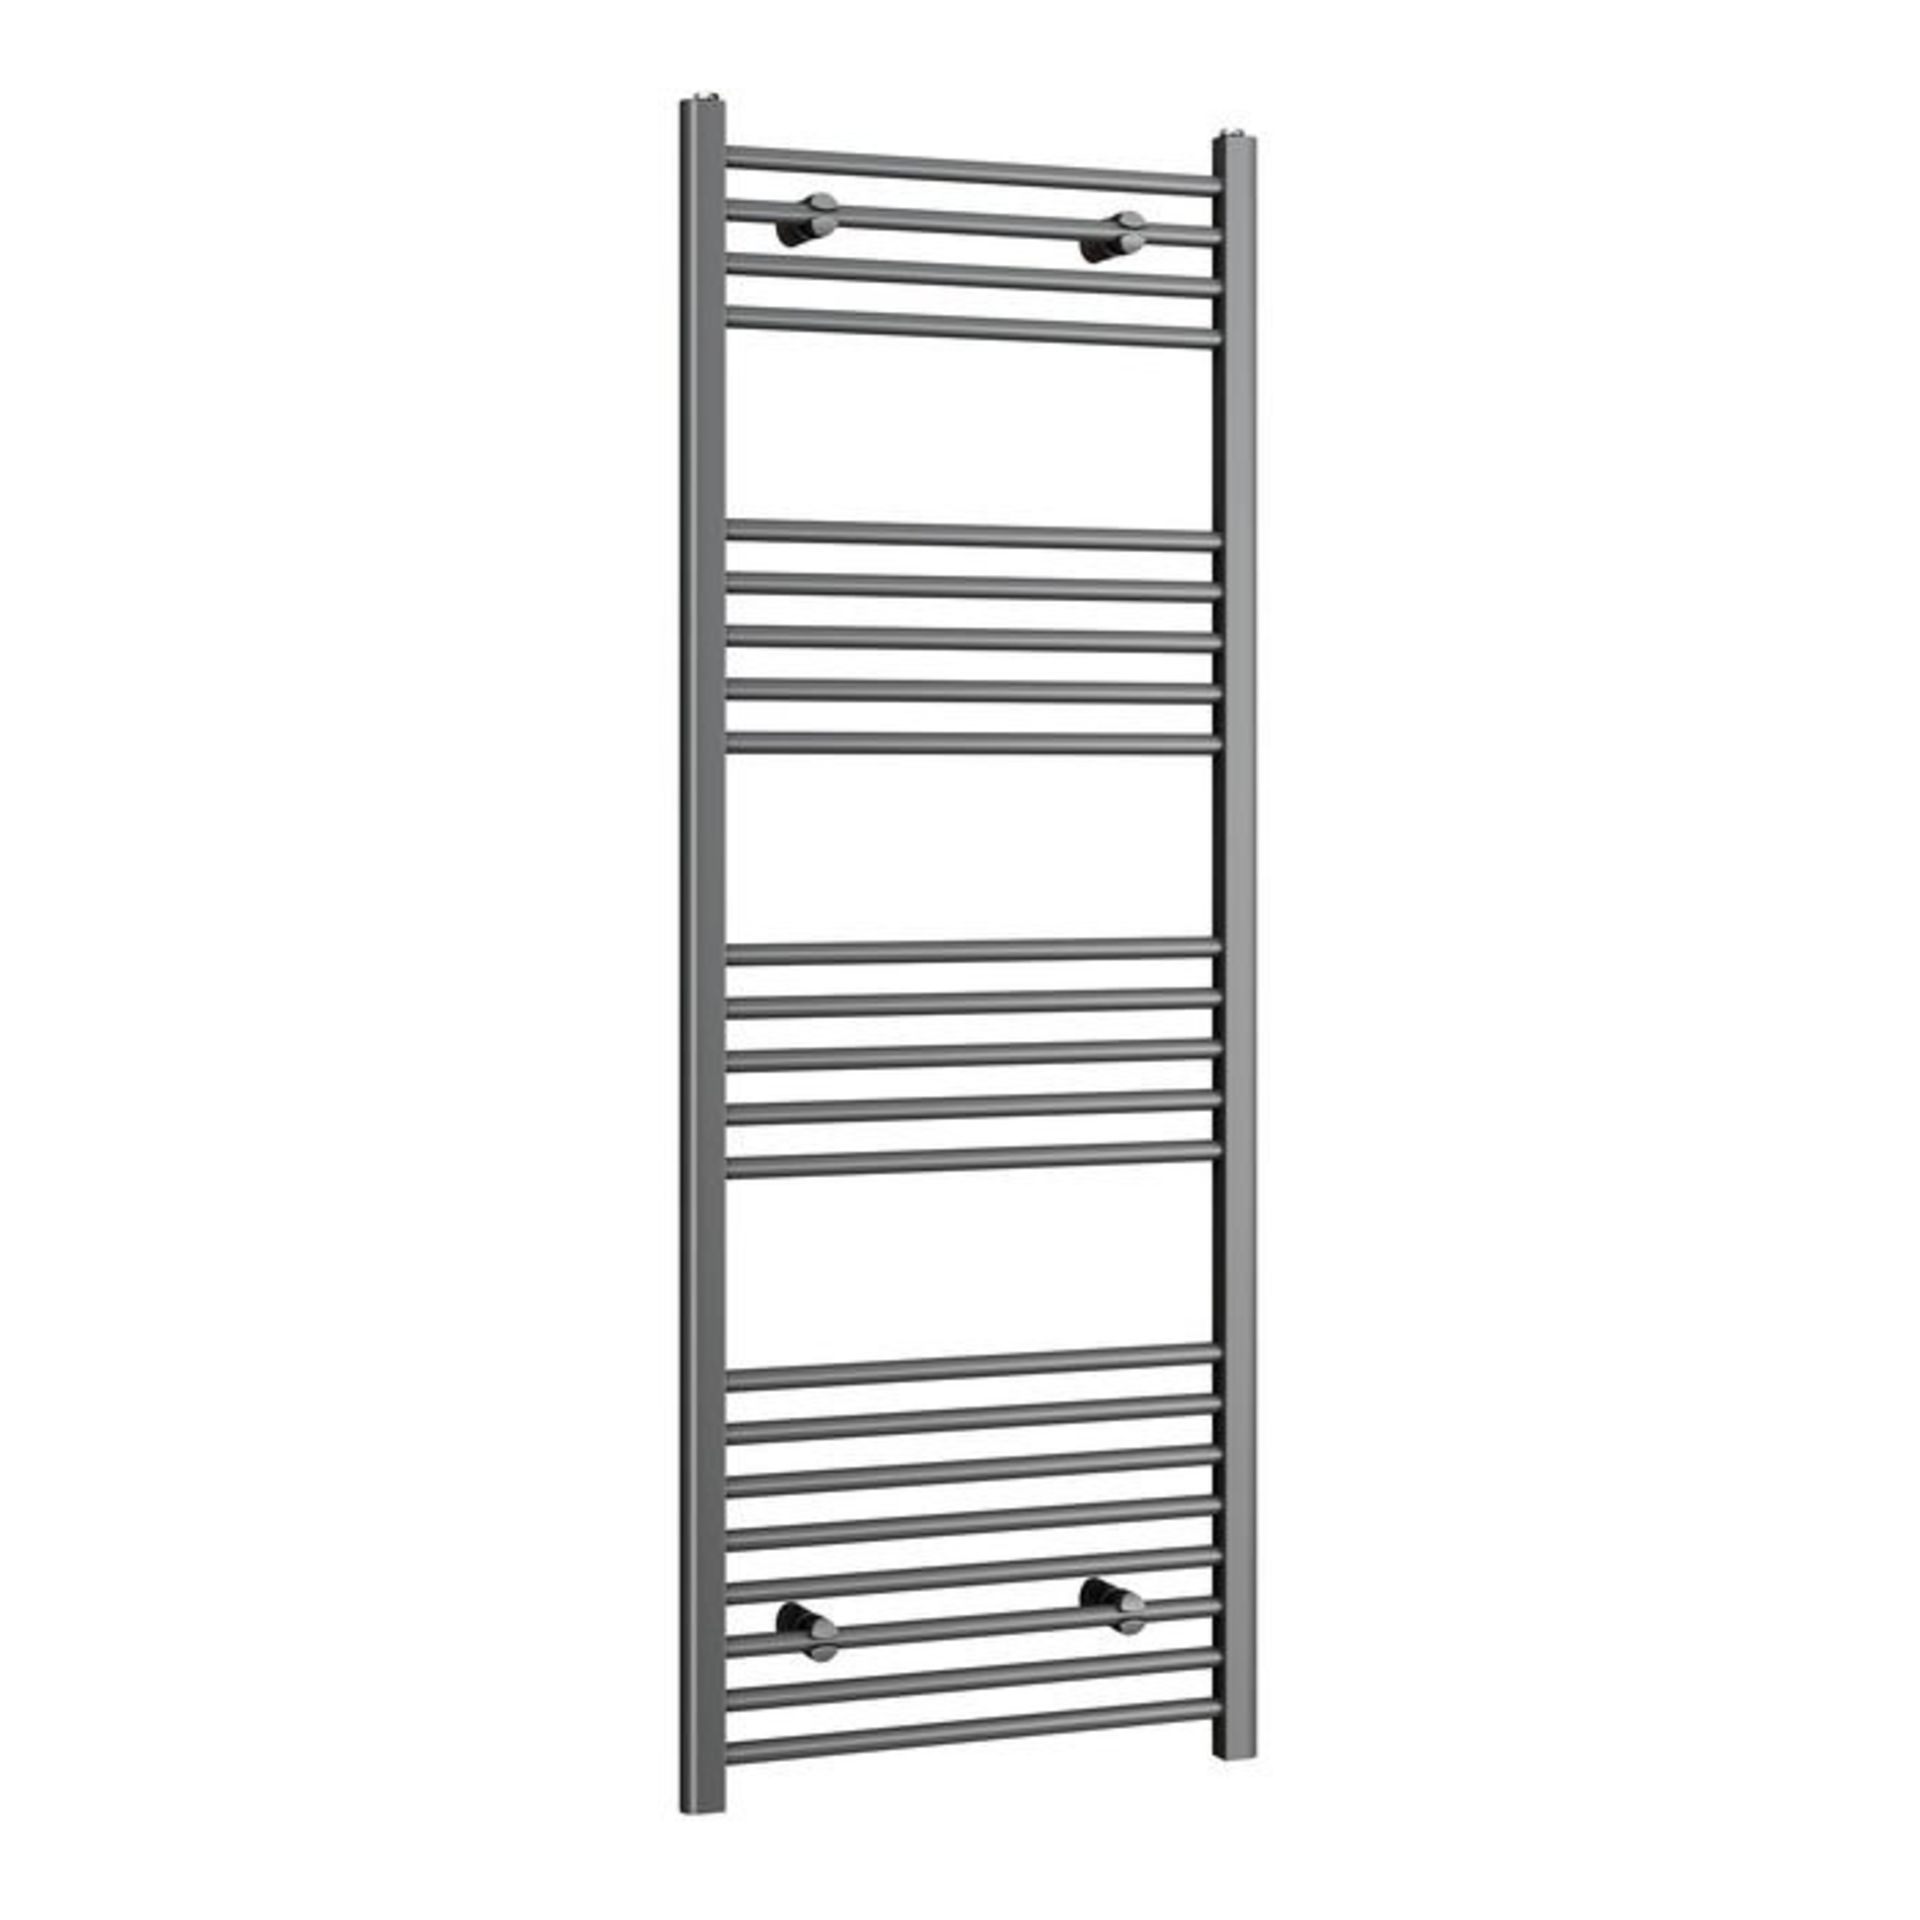 (H102) 1600x600mm - 20mm Tubes - Anthracite Heated Straight Rail Ladder Towel Radiator . Corrosion - Image 2 of 3